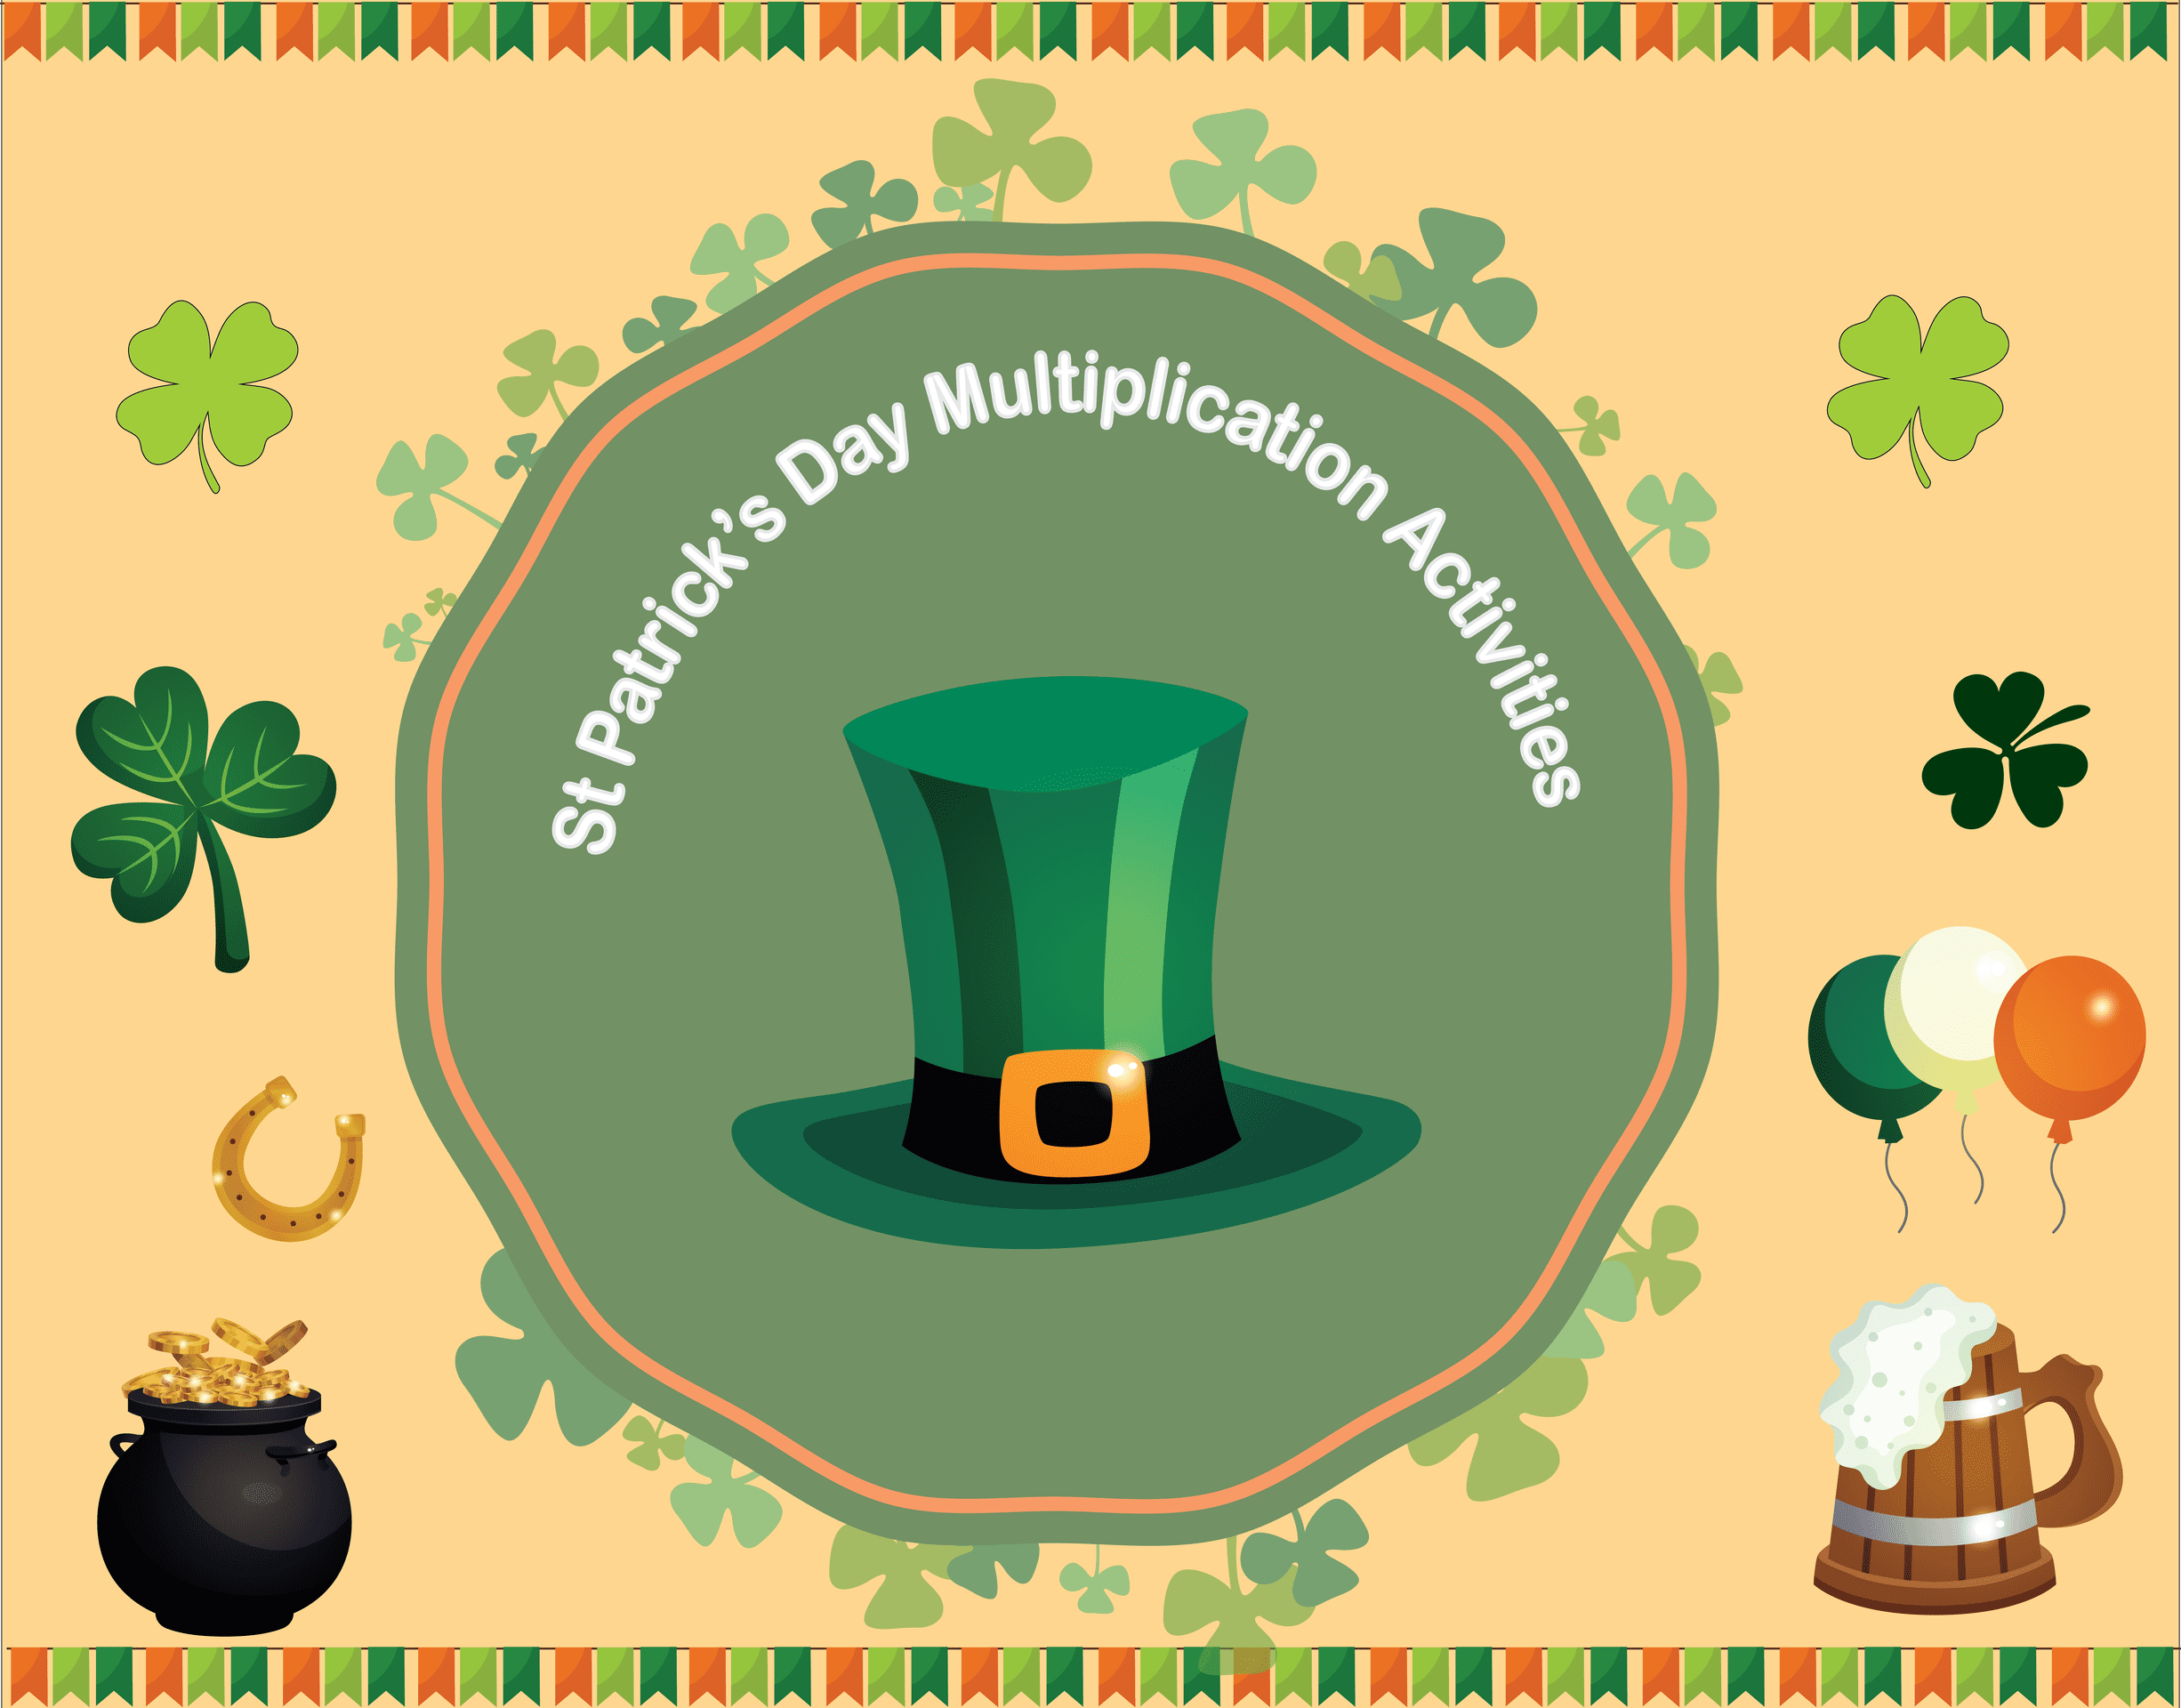 5 St. Patrick’s Day Multiplication Worksheets | Fun Activities